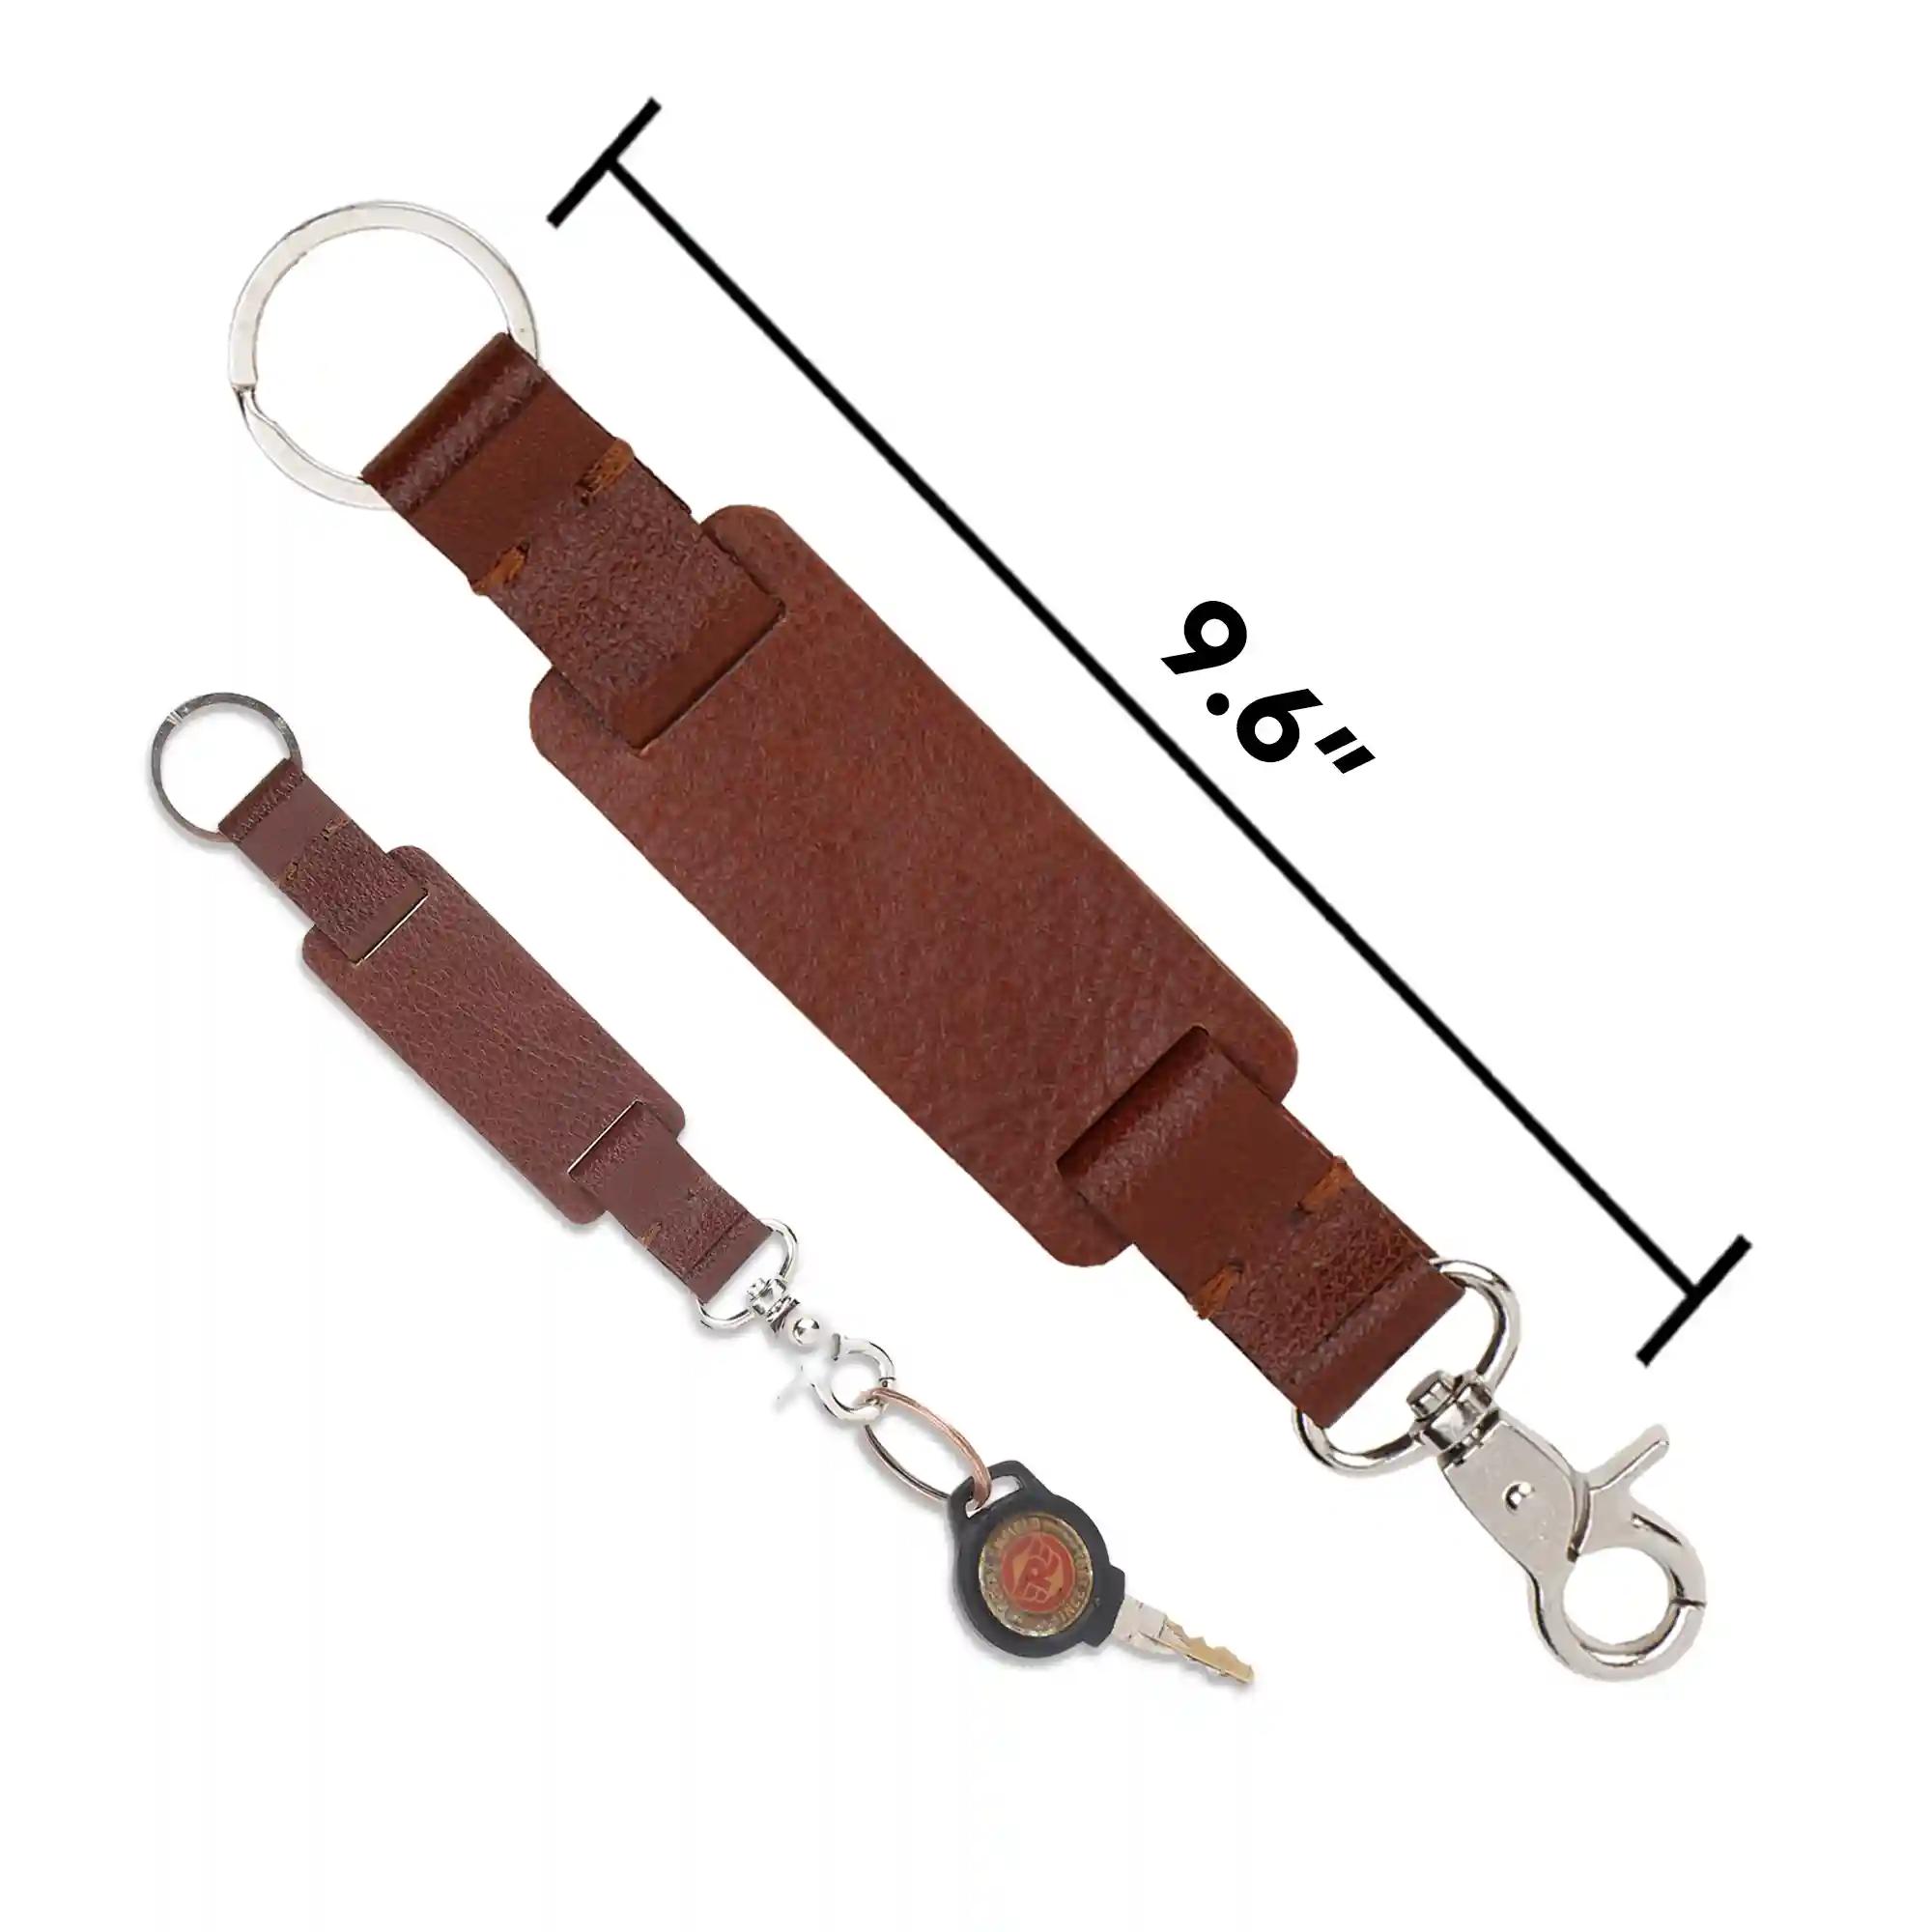 Leather Keychain With Dog Hook